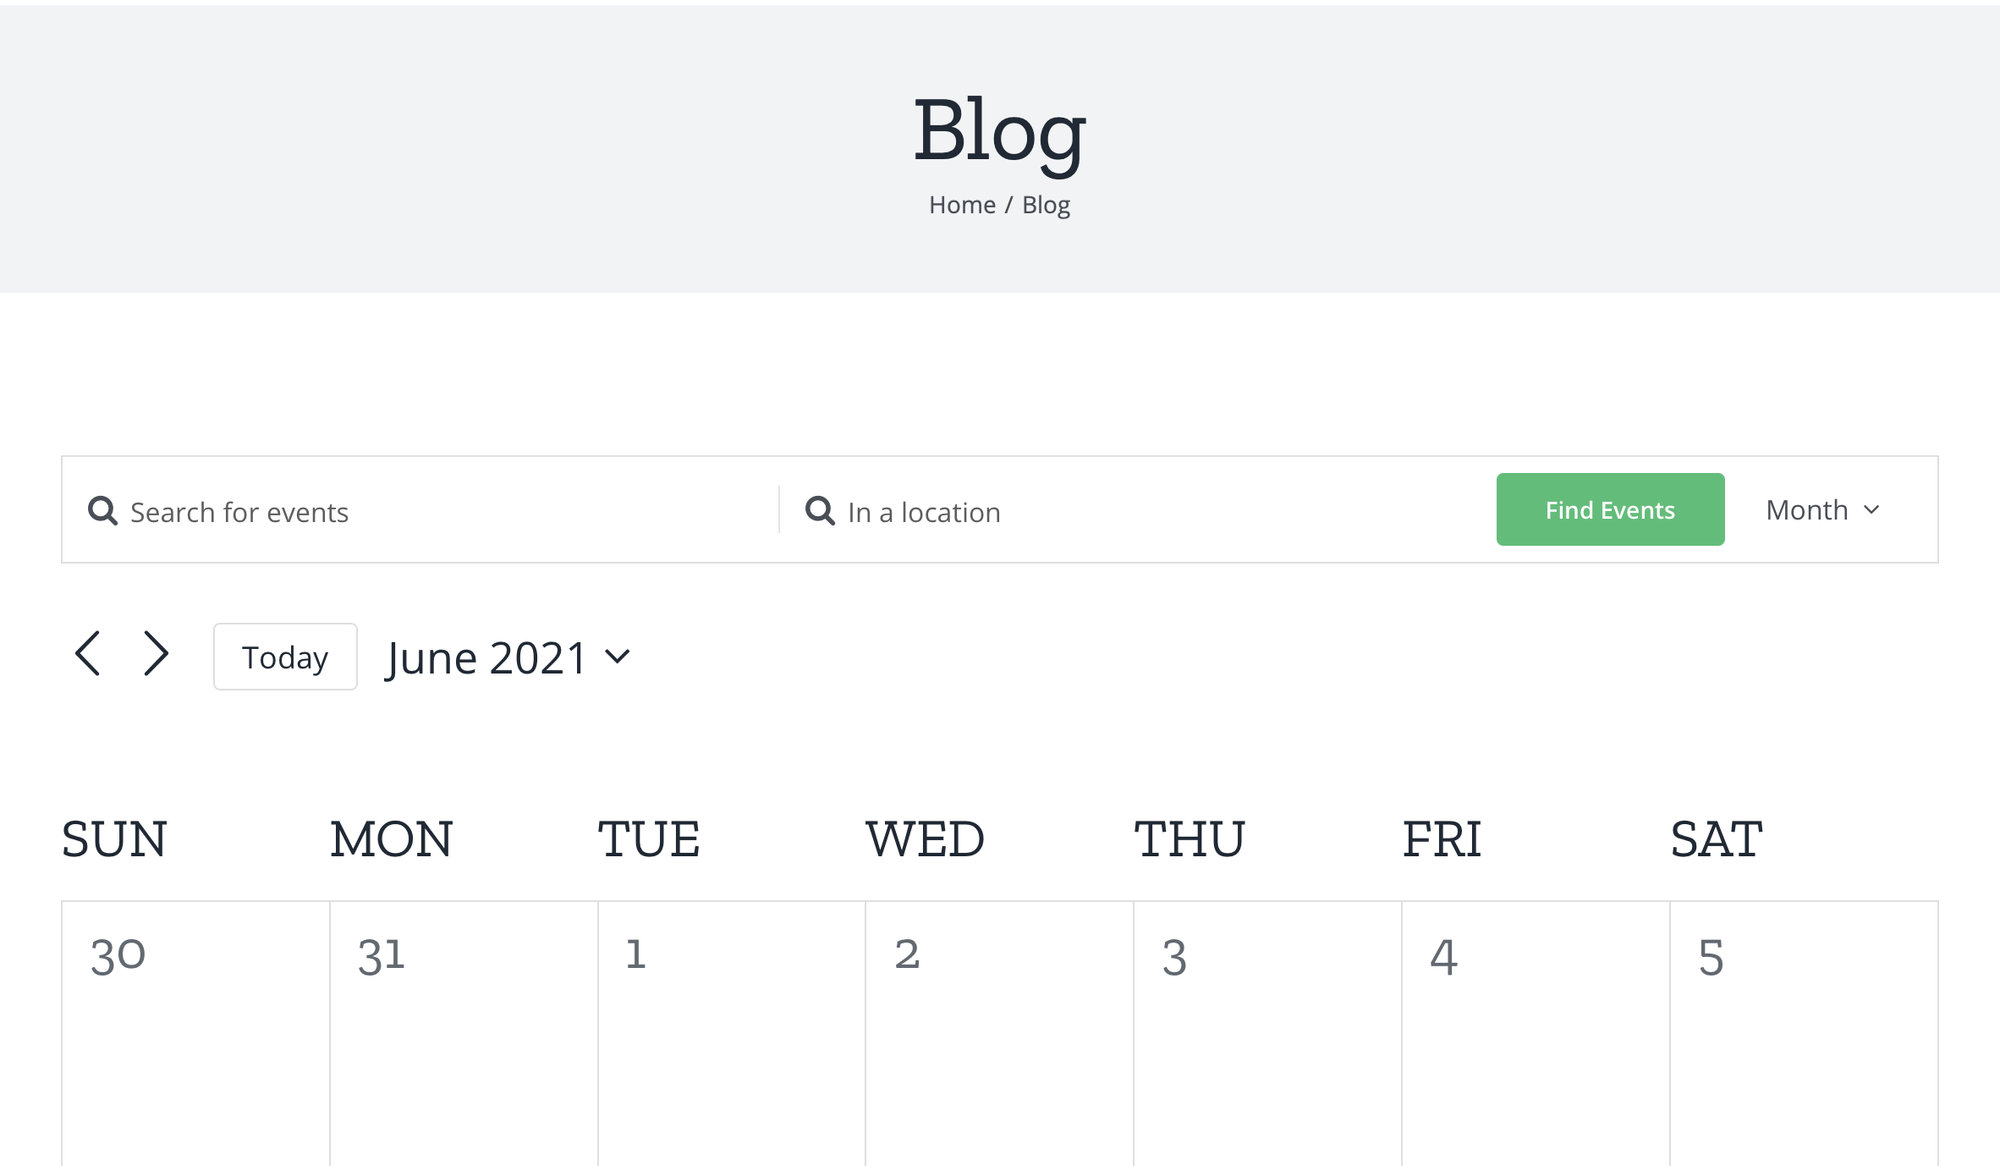 Showing the calendar month view with a light gray header that says Blog as the page title in a large font followed by breadcrumbs that display links to the site's Home and Blog.